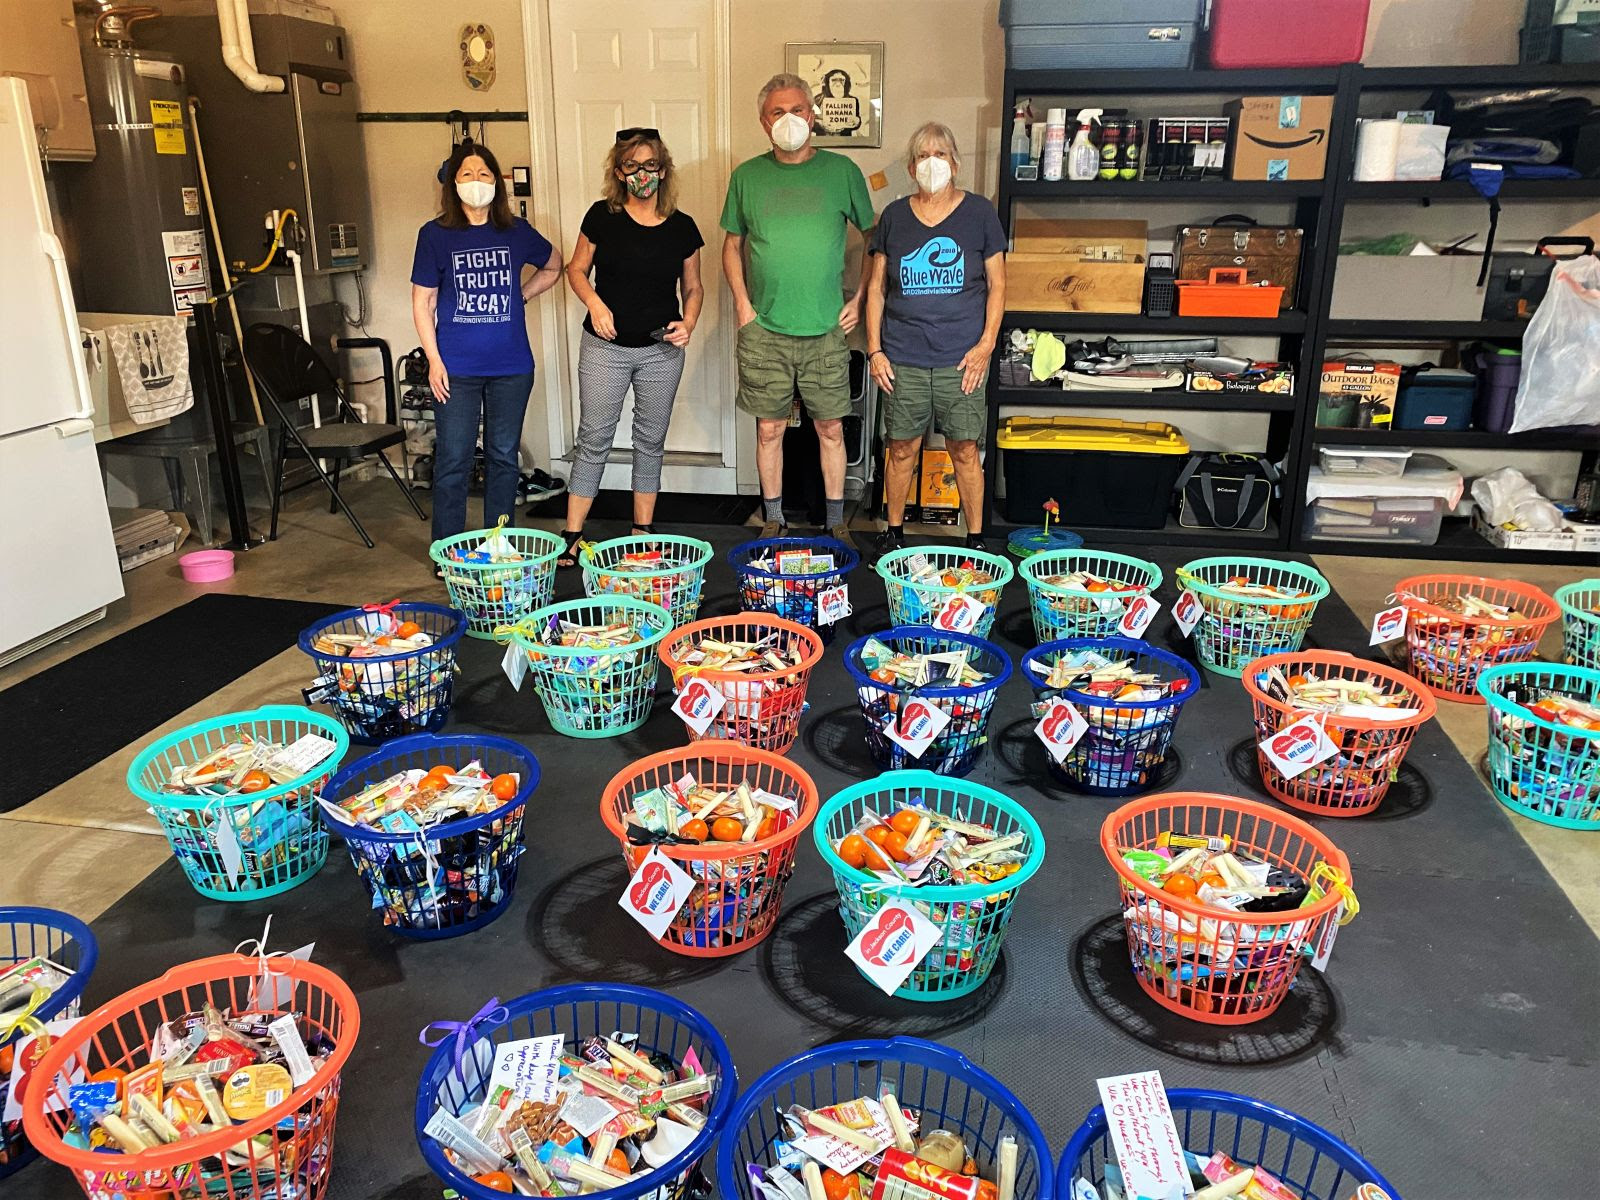 Picture of 4 people standing behind 25 plastic baskets filled with goodies.